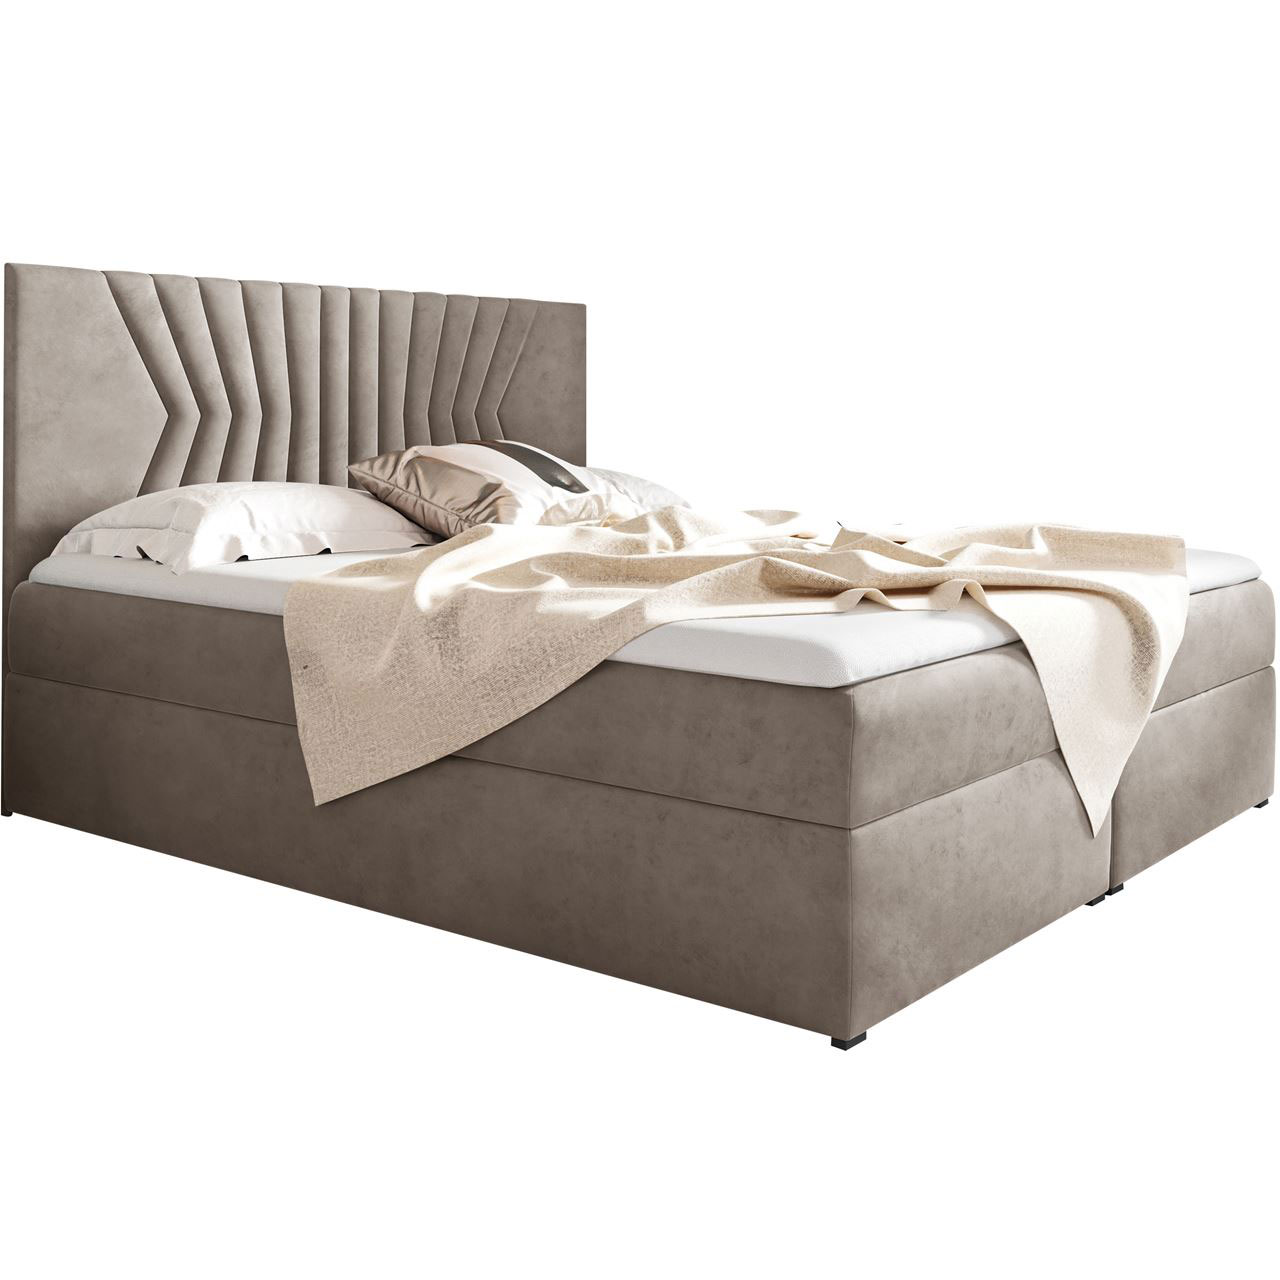 Upholstered bed ASTRO 140x200 fresh 02